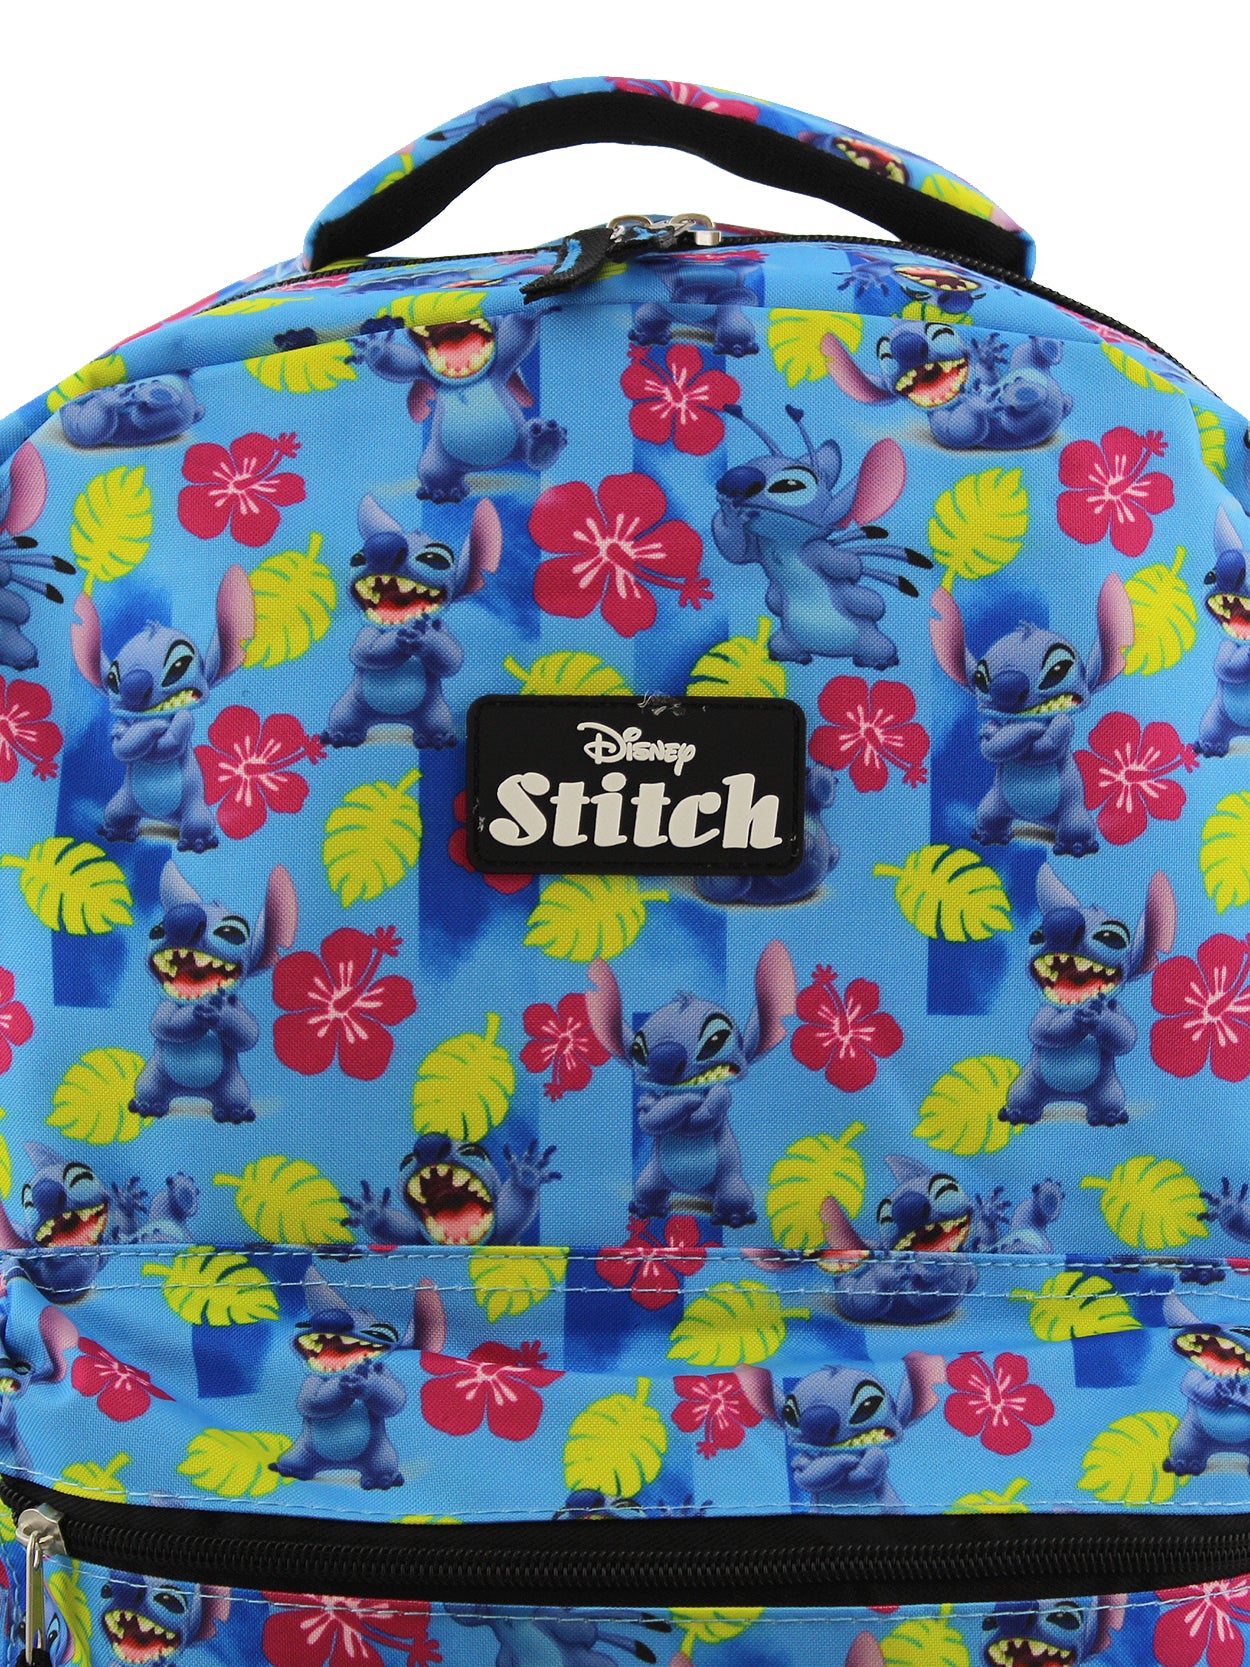 Disney Stitch Backpack Set for Kids, 16 inch with Lunch Bag and Water Bottle